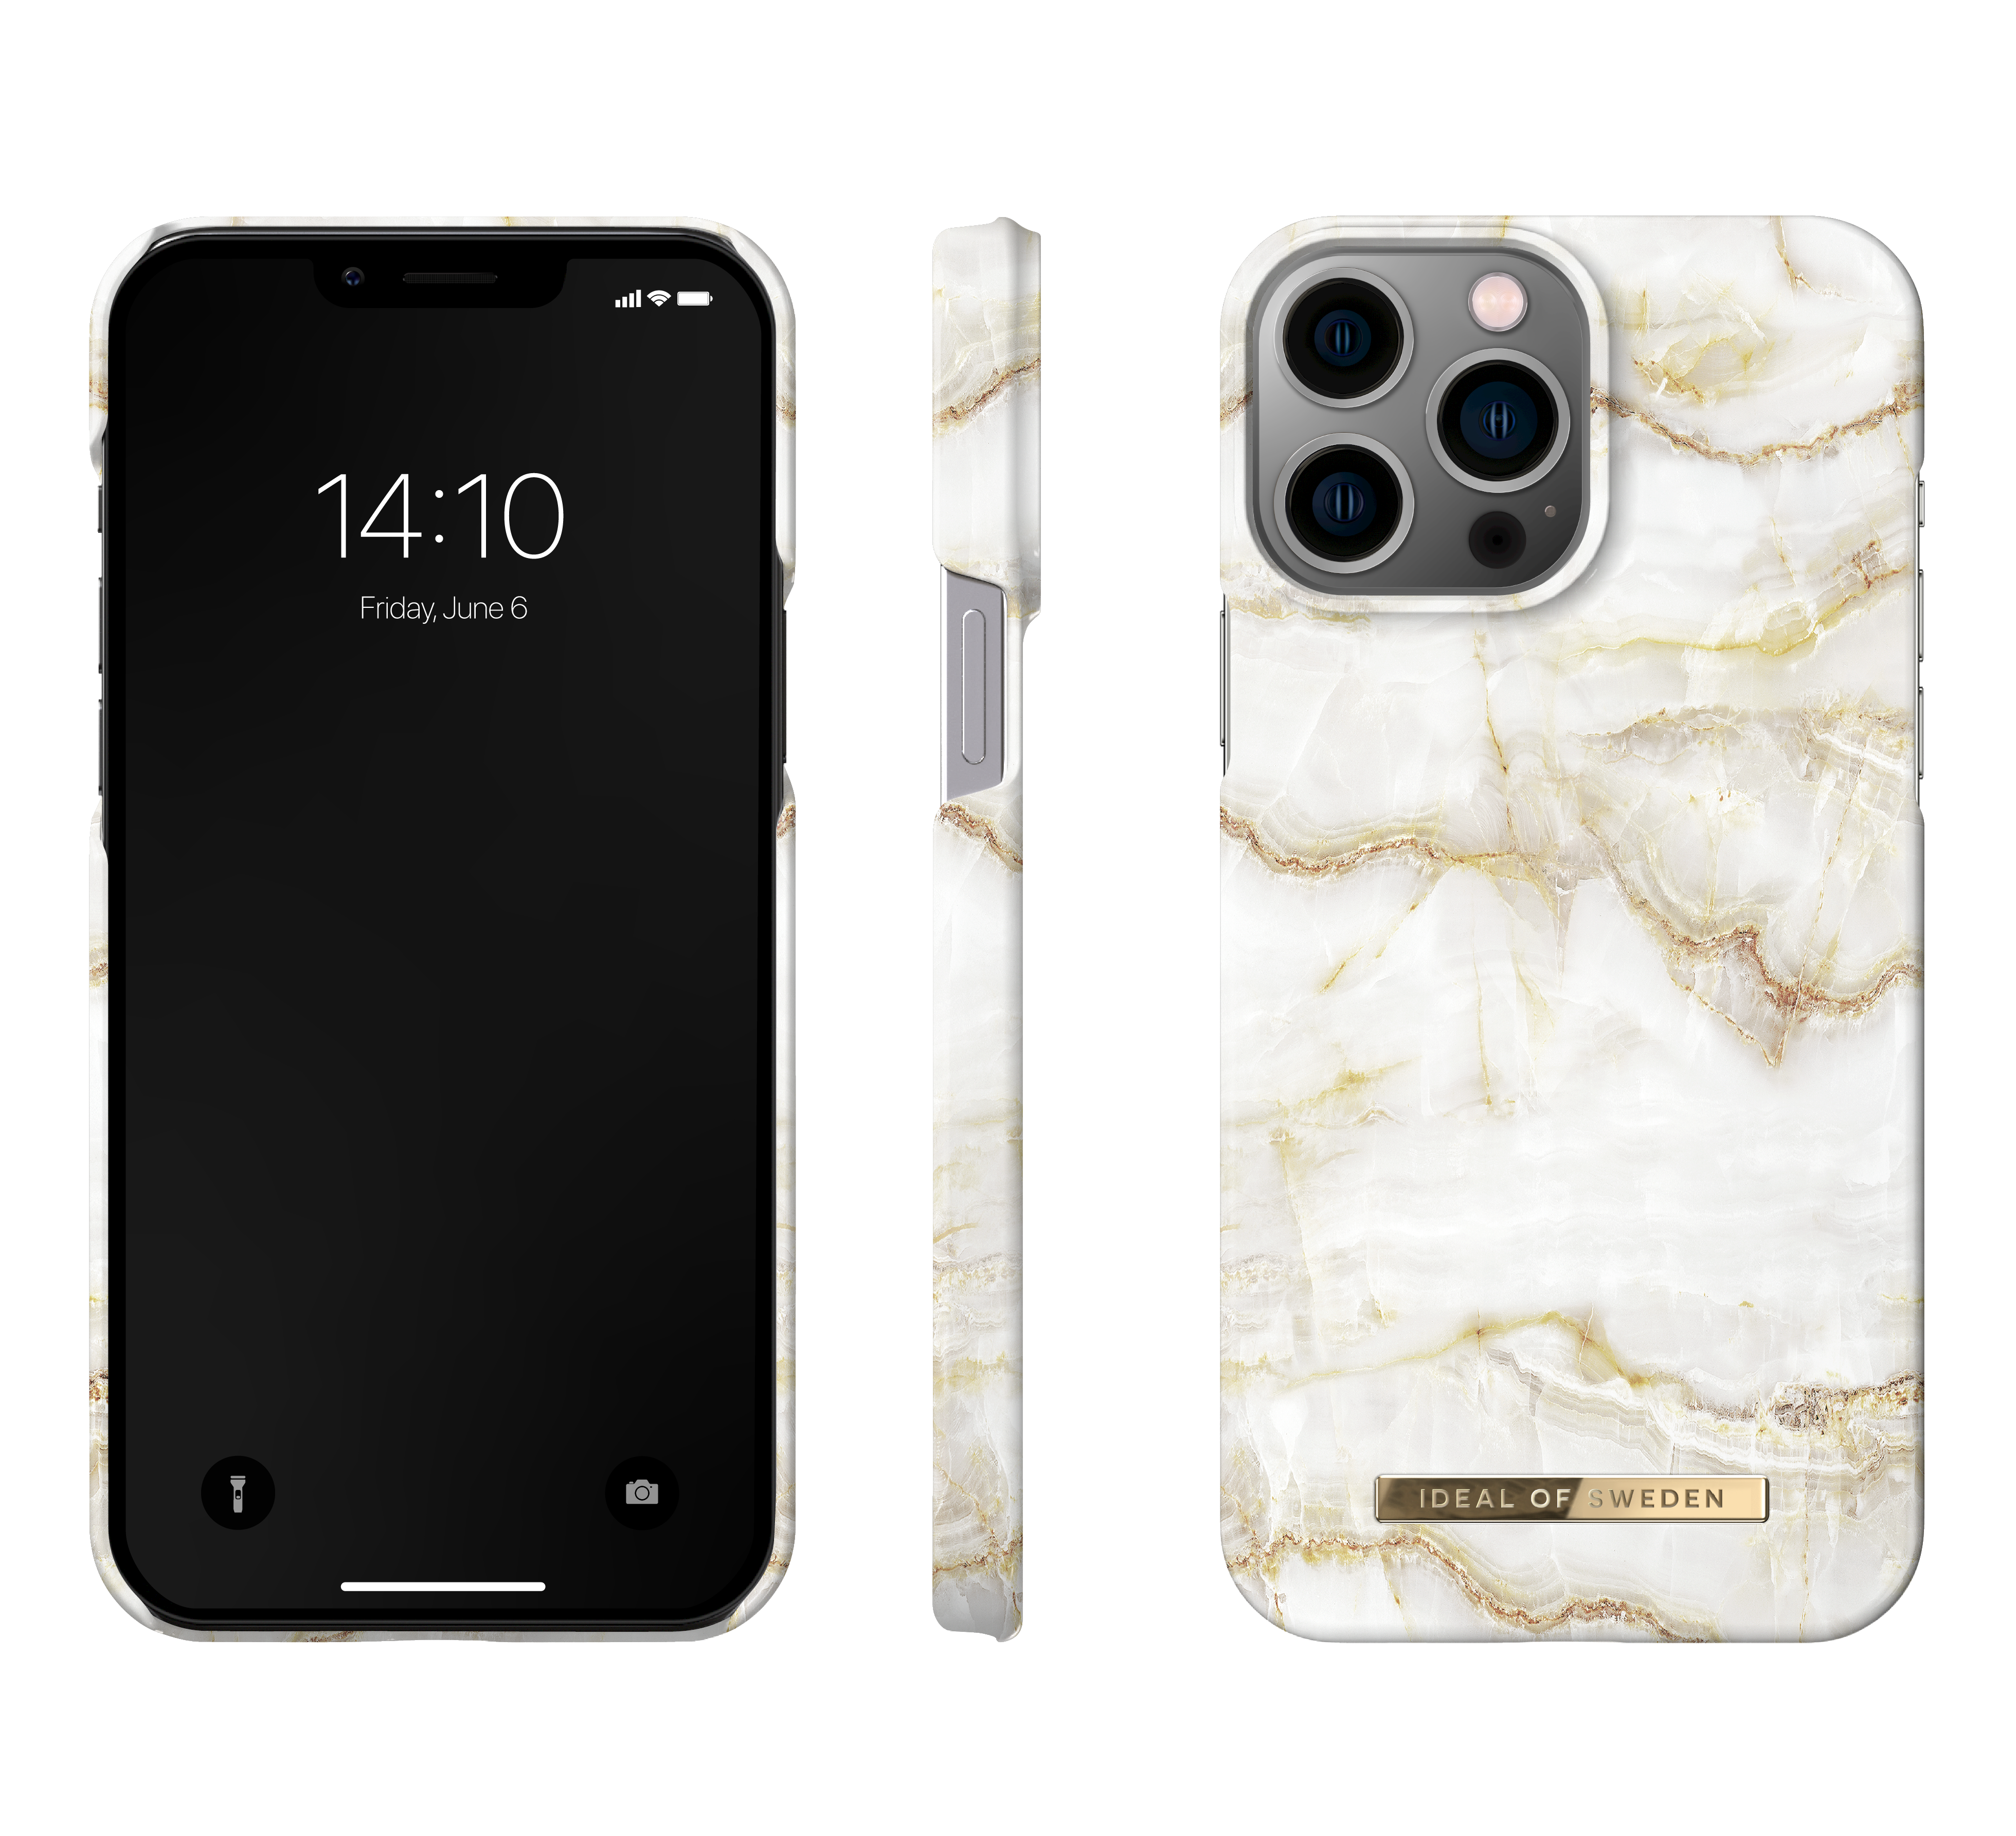 Fashion Case iPhone 13 Pro Max Golden Pearl Marble